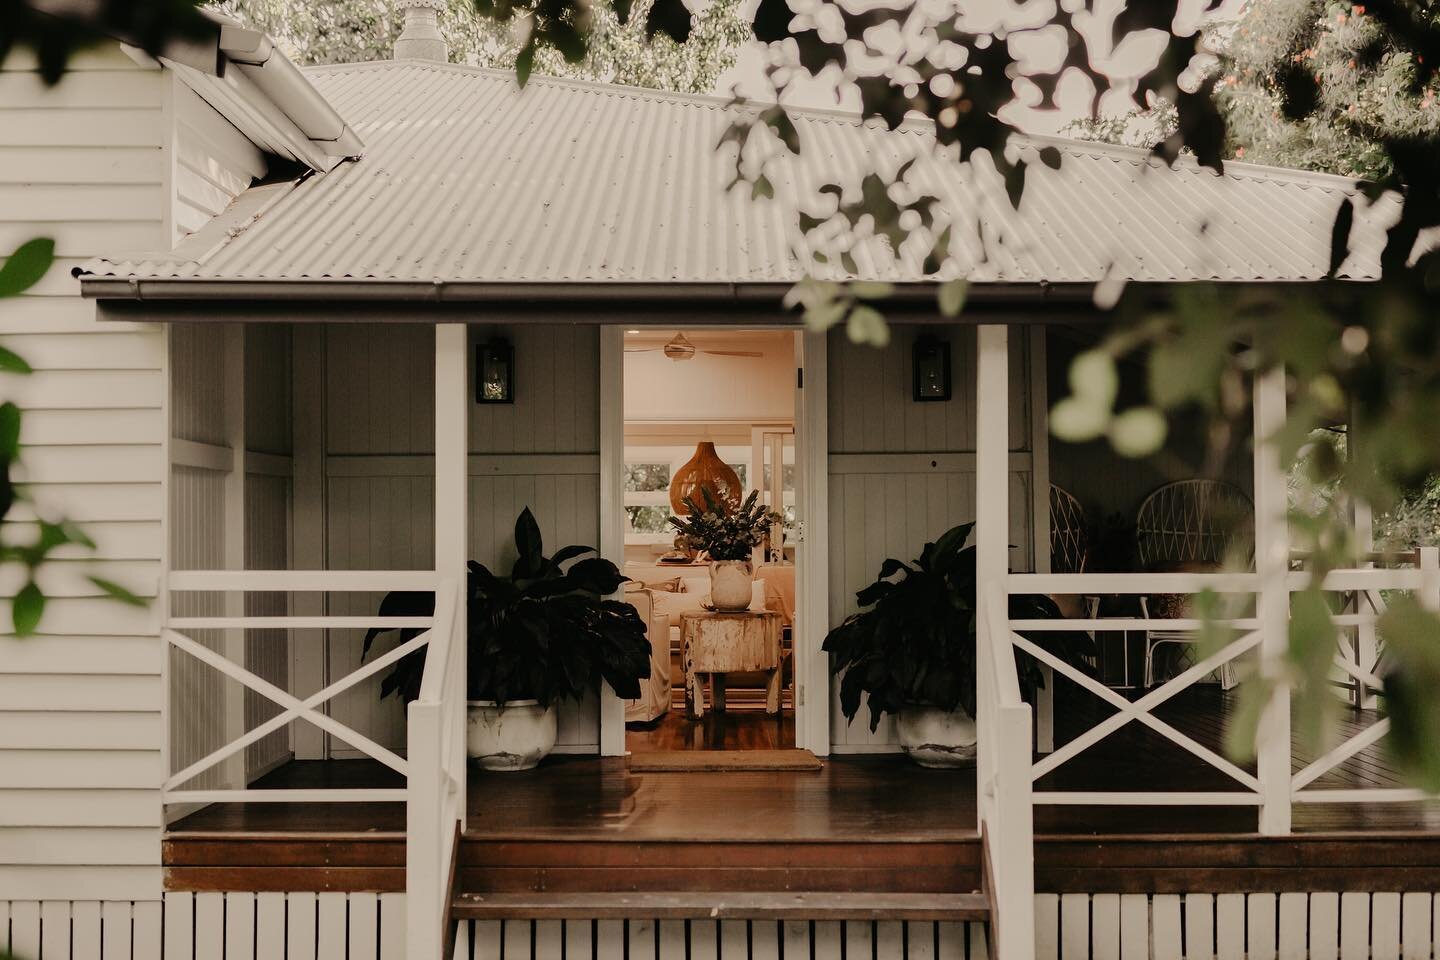 My dear friend over at @the_clay_society is selling her amazing old Queenslander. When Jules told me she wanted to put it online, I raced over to sneak in a mini shoot to capture a few snippets of this amazing abode. I will attach a link in my storie